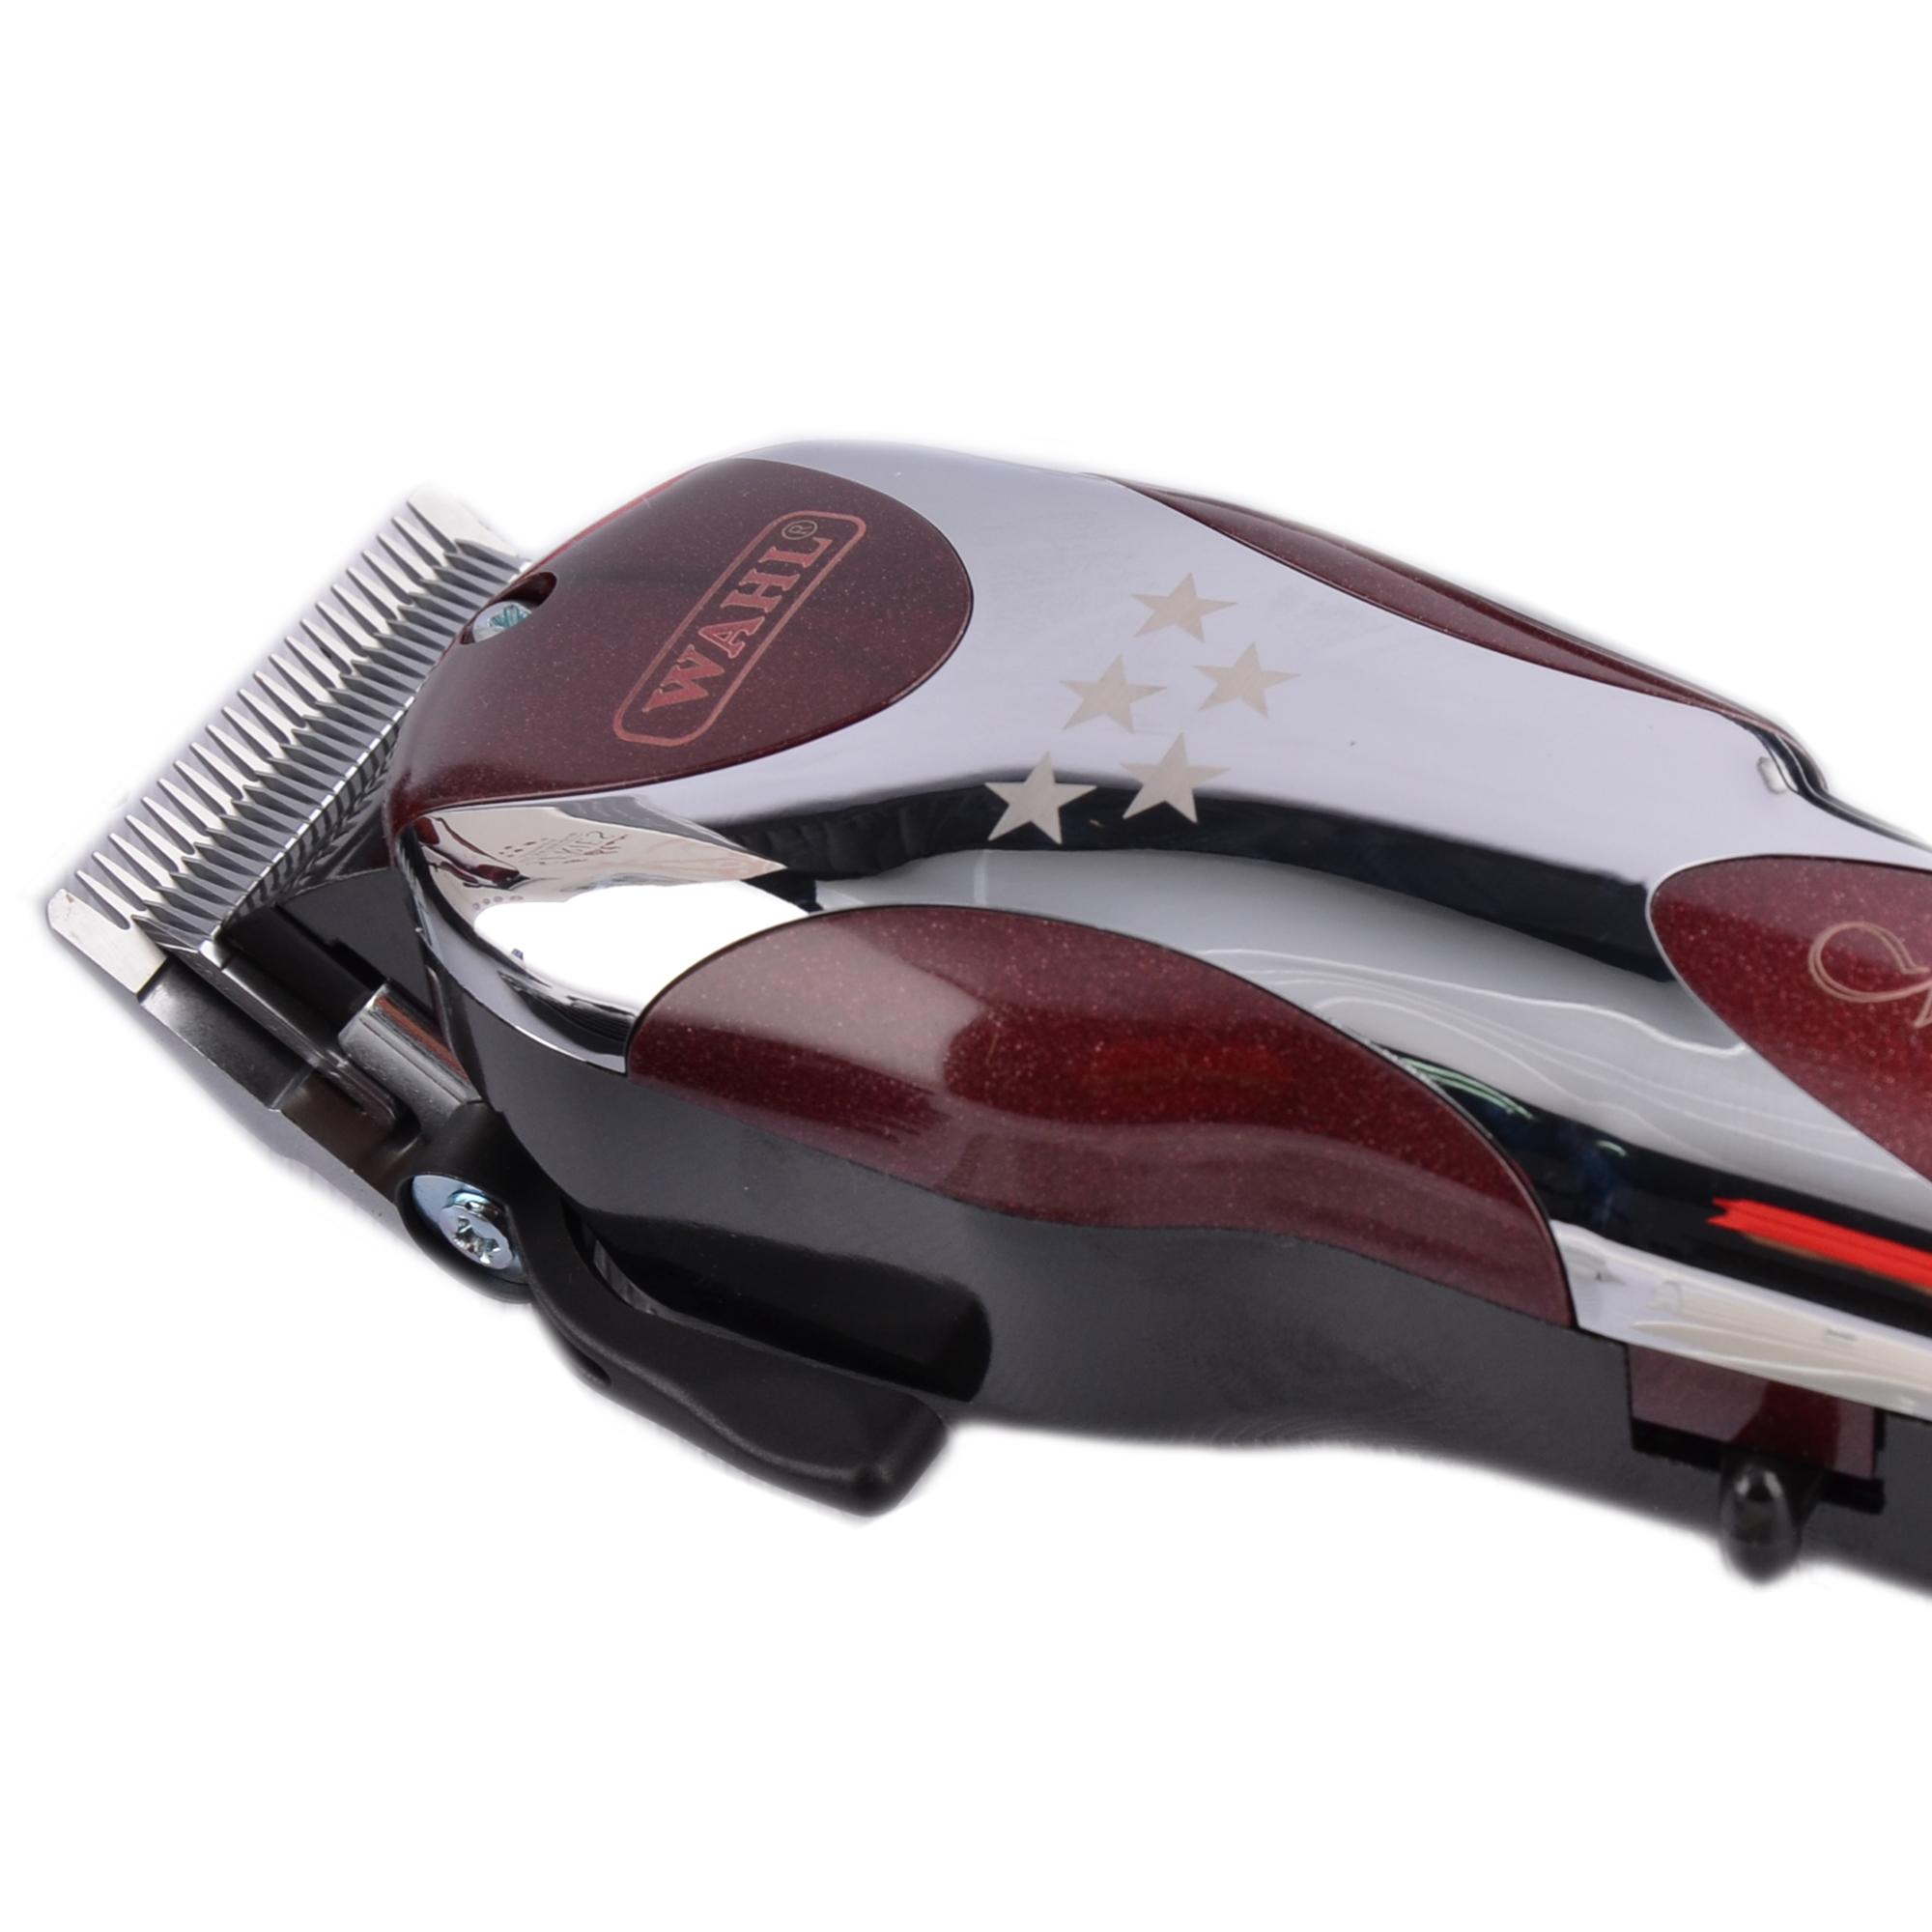 wahl hair clipper for sale